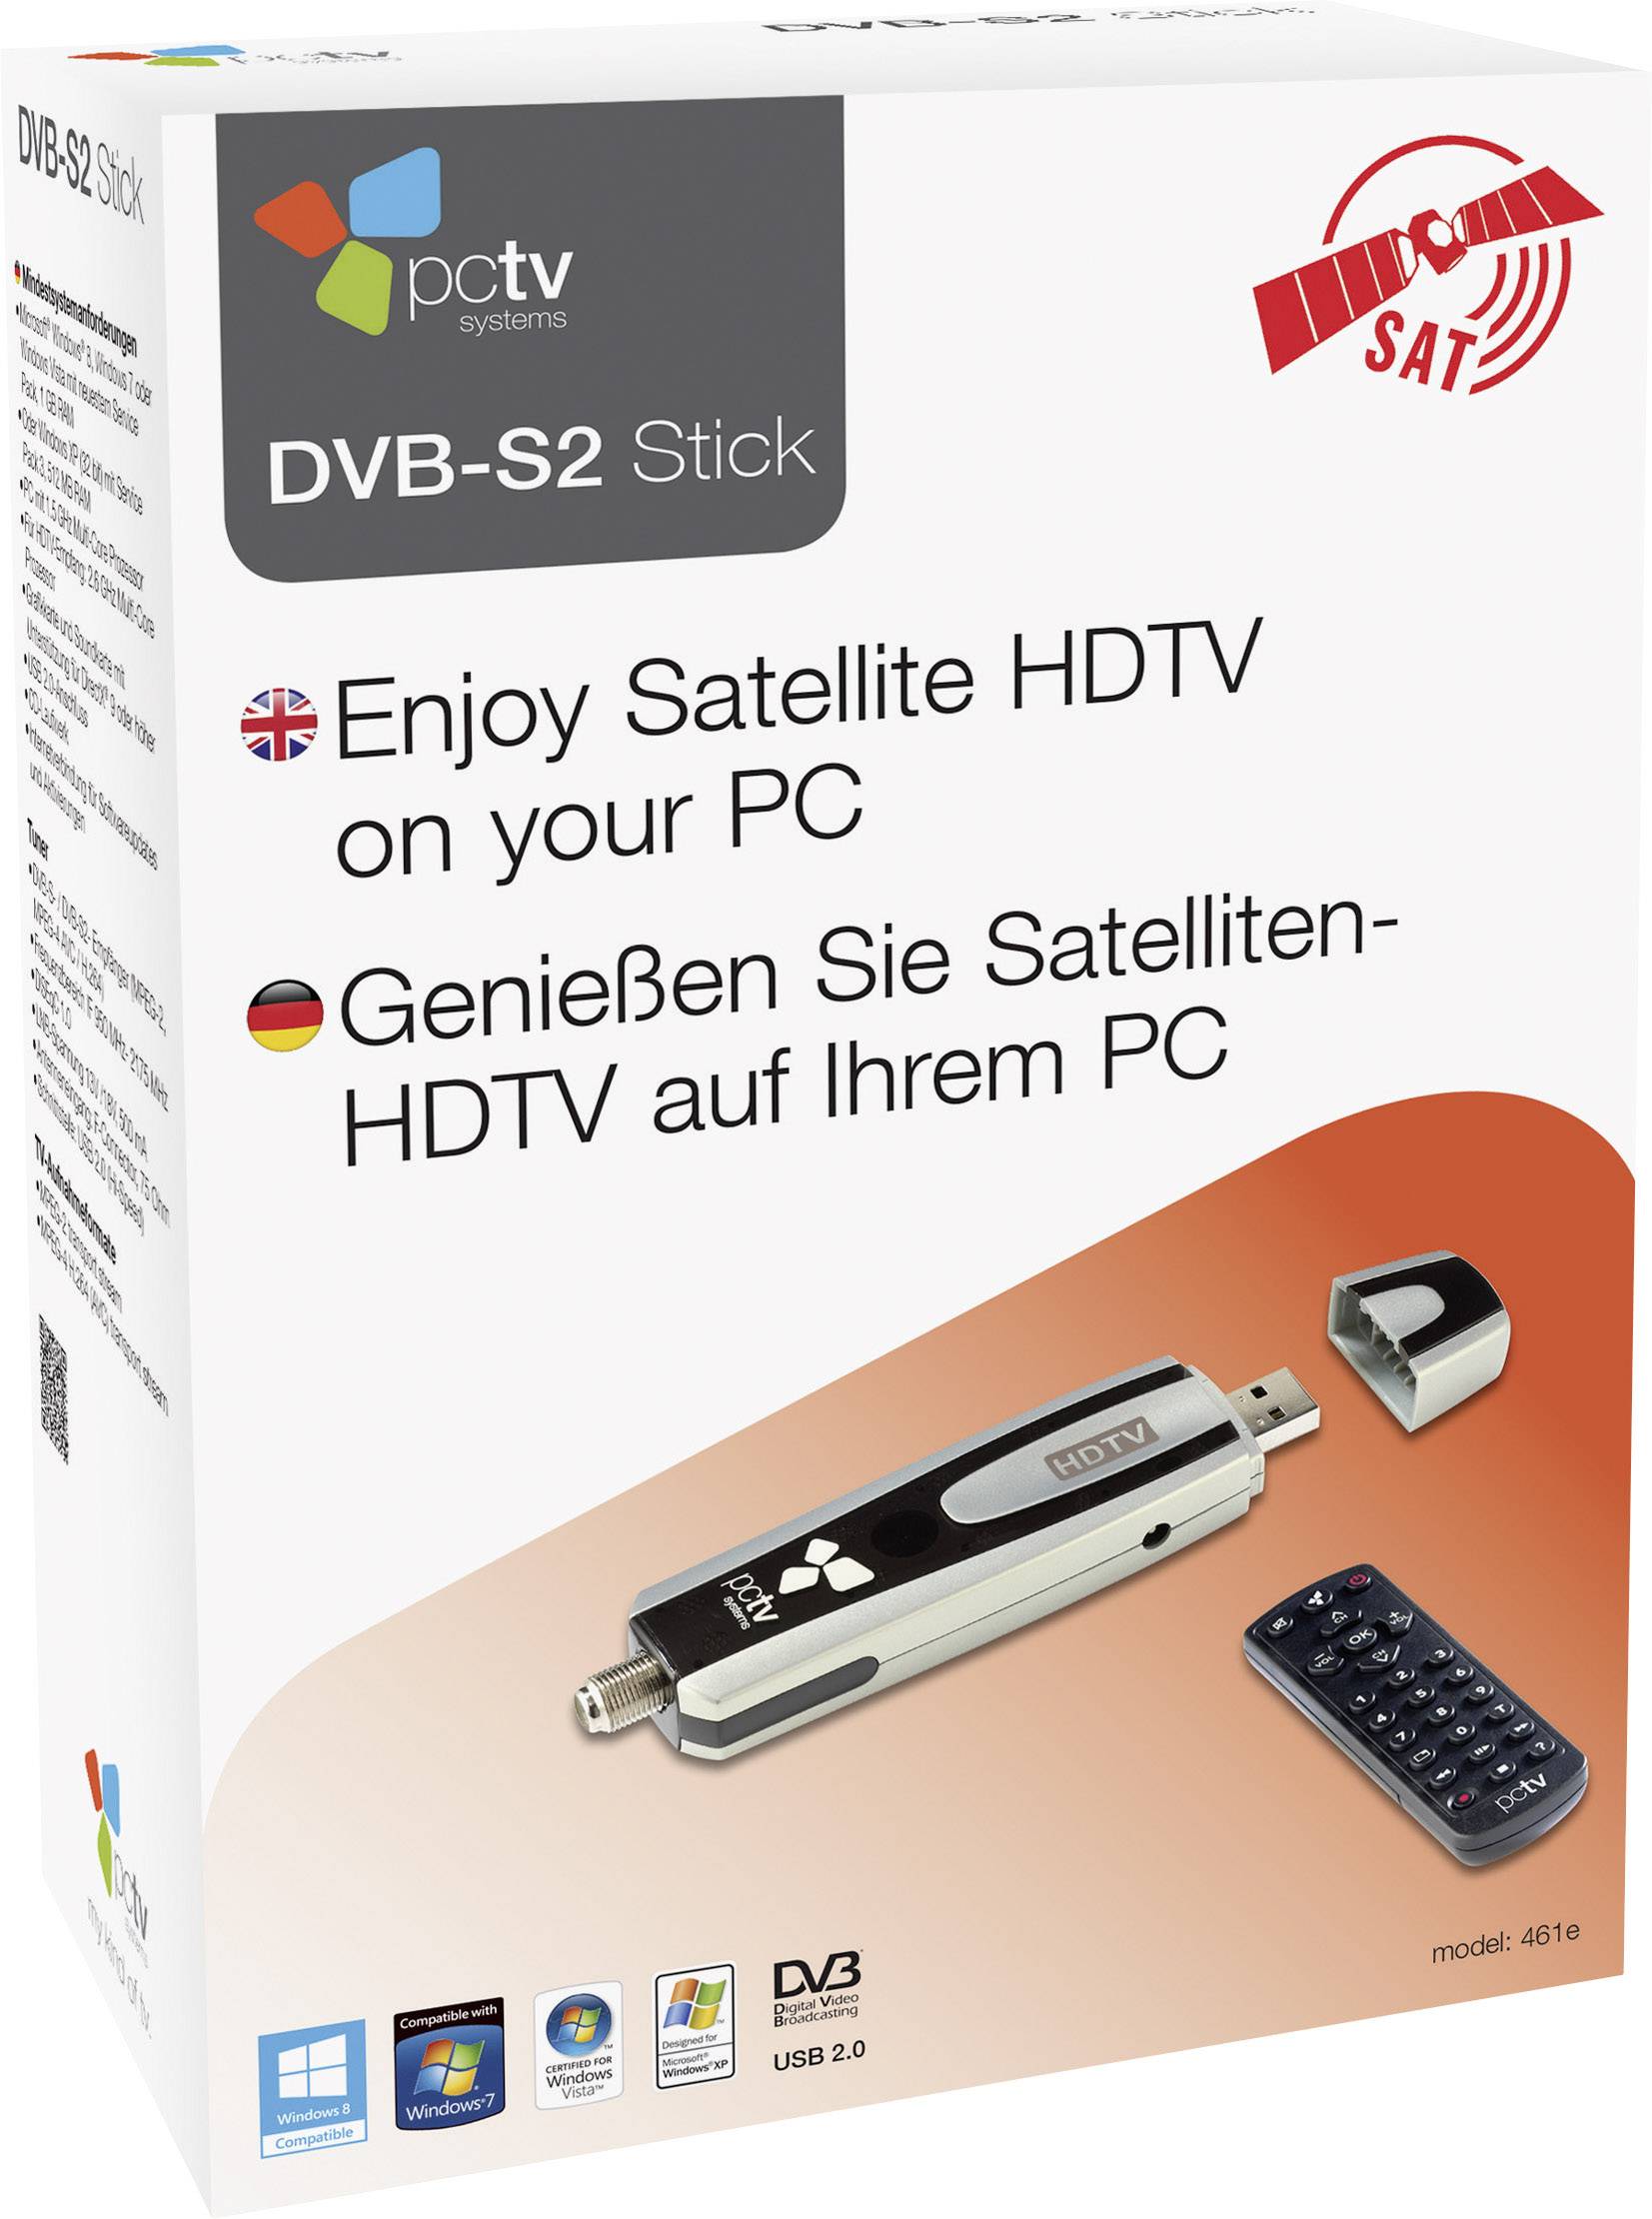 software for pctv systems dongle